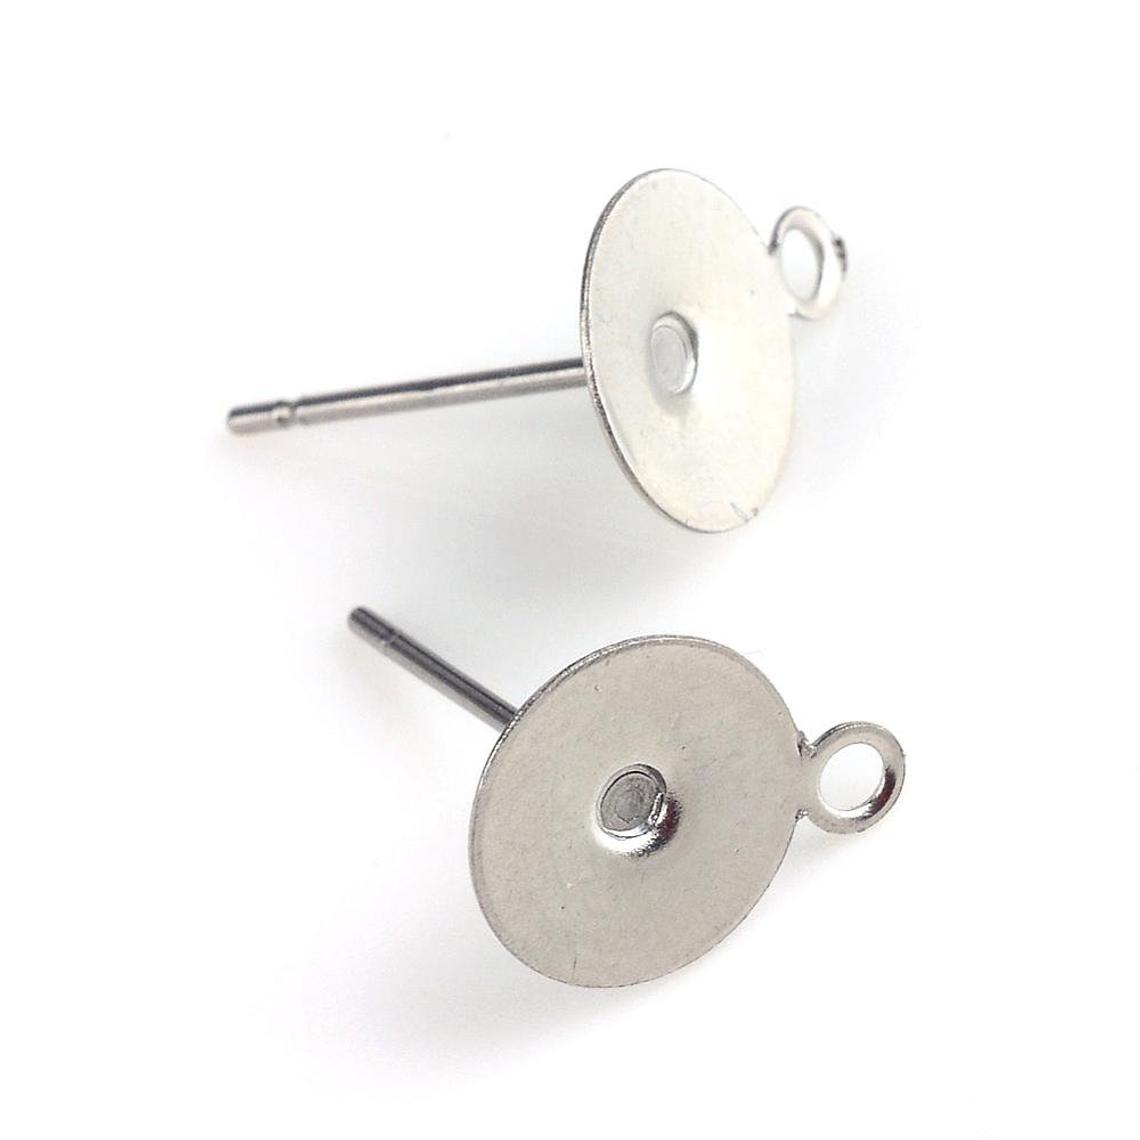 E740 - 50 pcs (25 pairs) 304 Stainless Steel Earring Posts/Bases/Studs ...